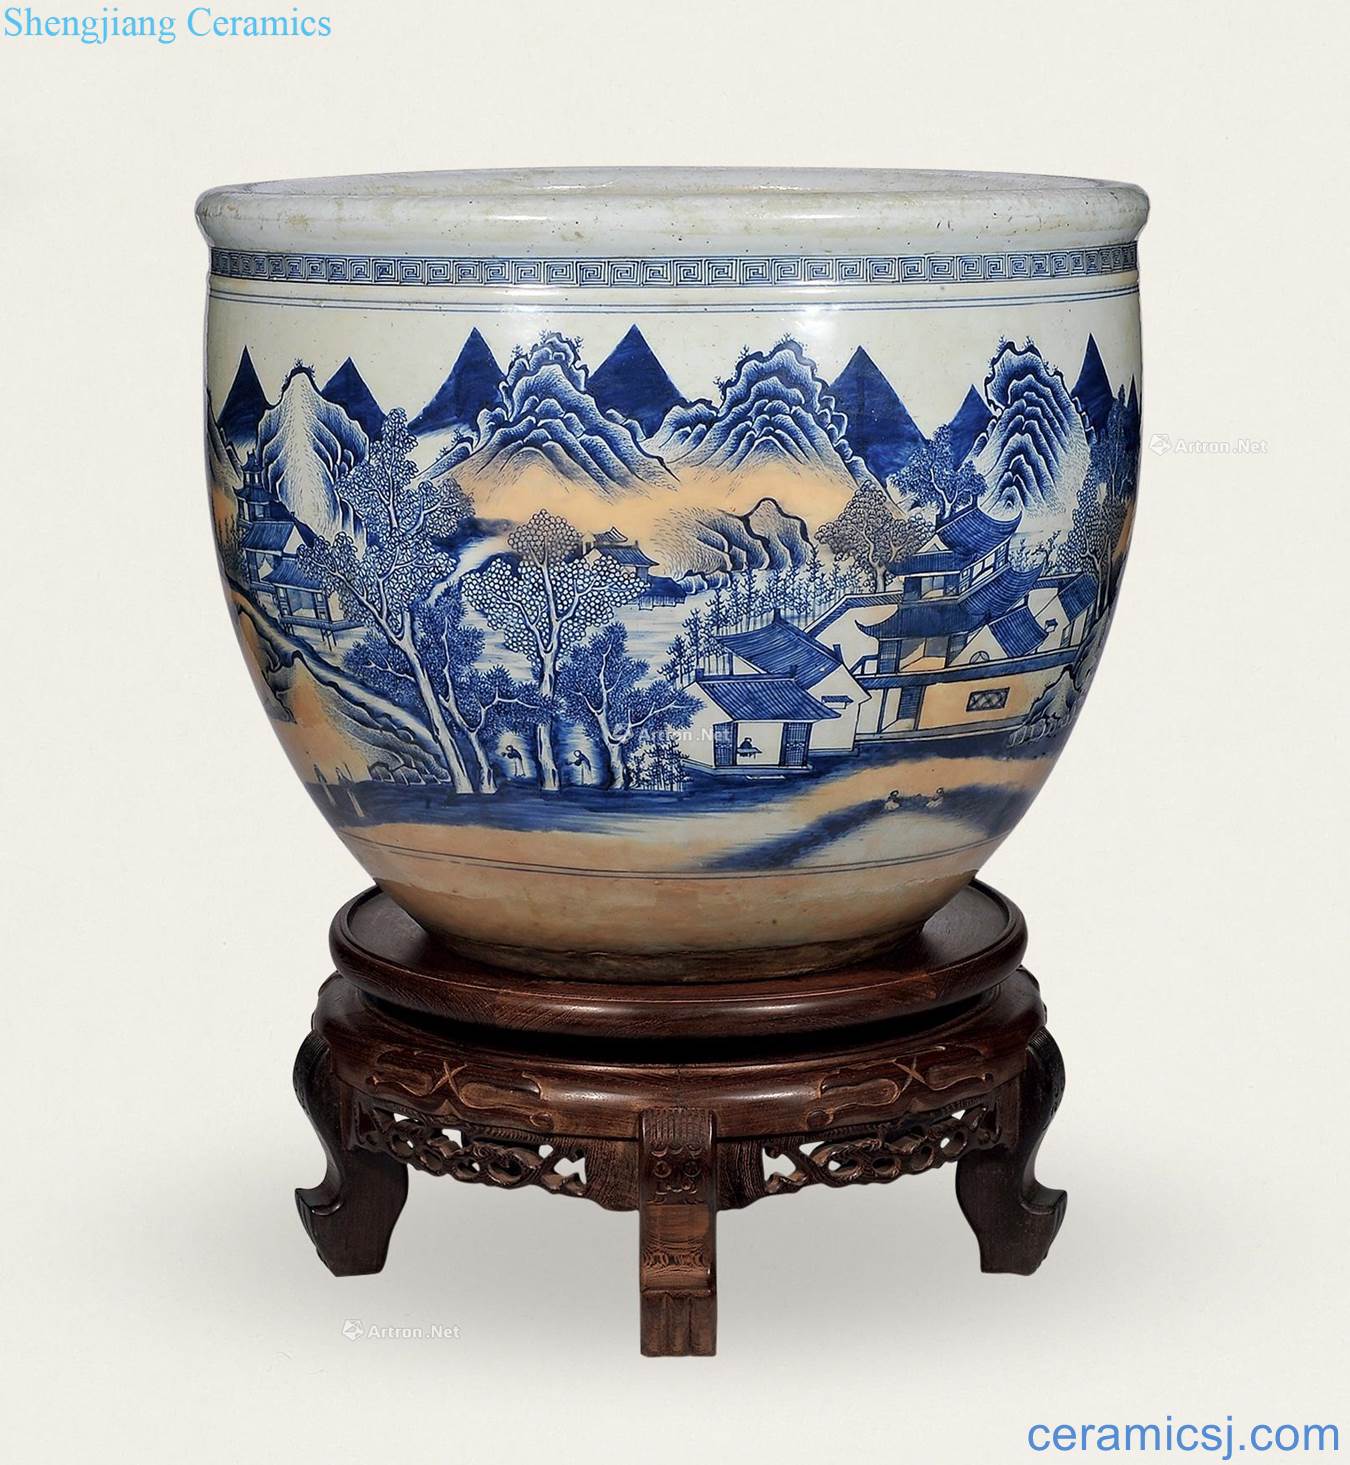 In the early qing Blue and white landscape pattern vats